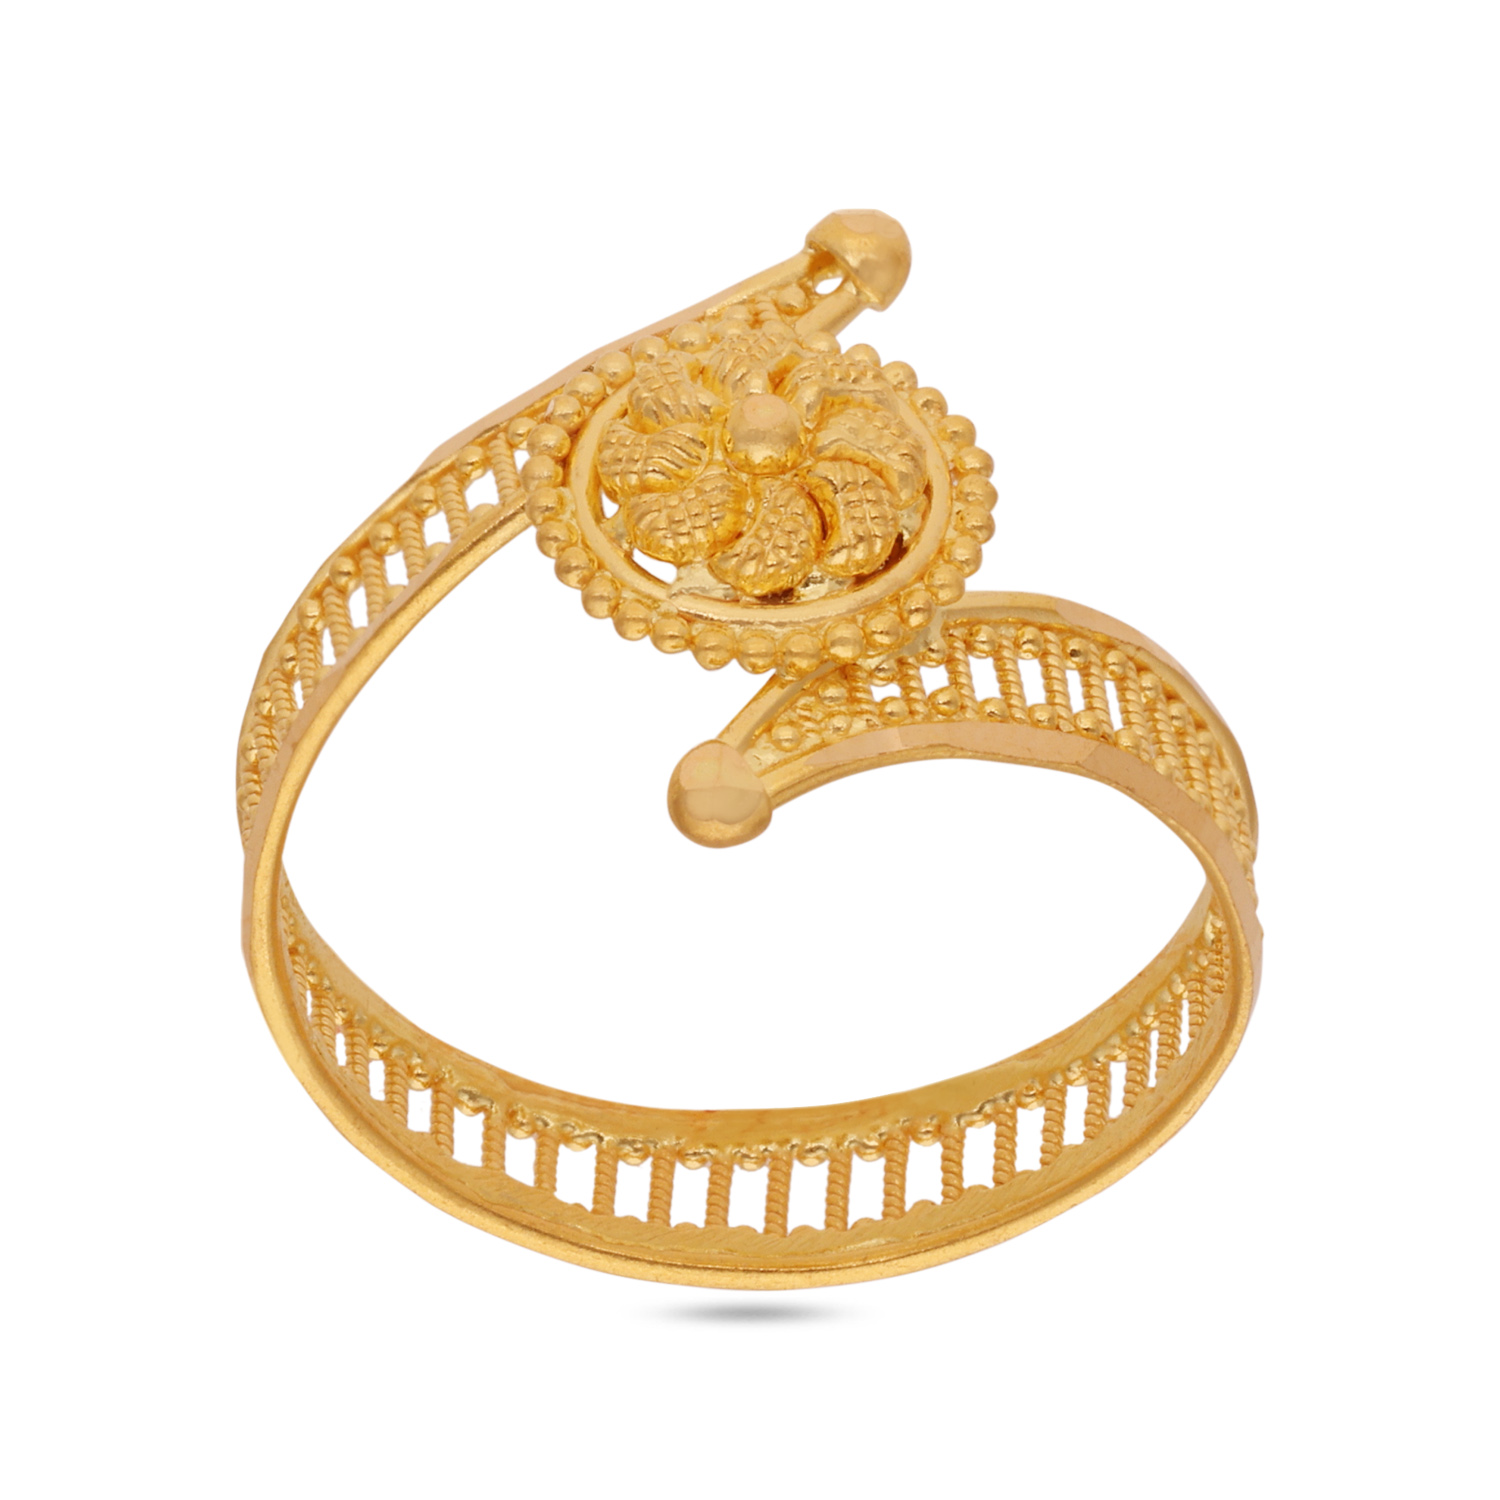 RIO AABI JEWELS 22CT  BIS HALLMARK GOLD RING FOR  WOMEN